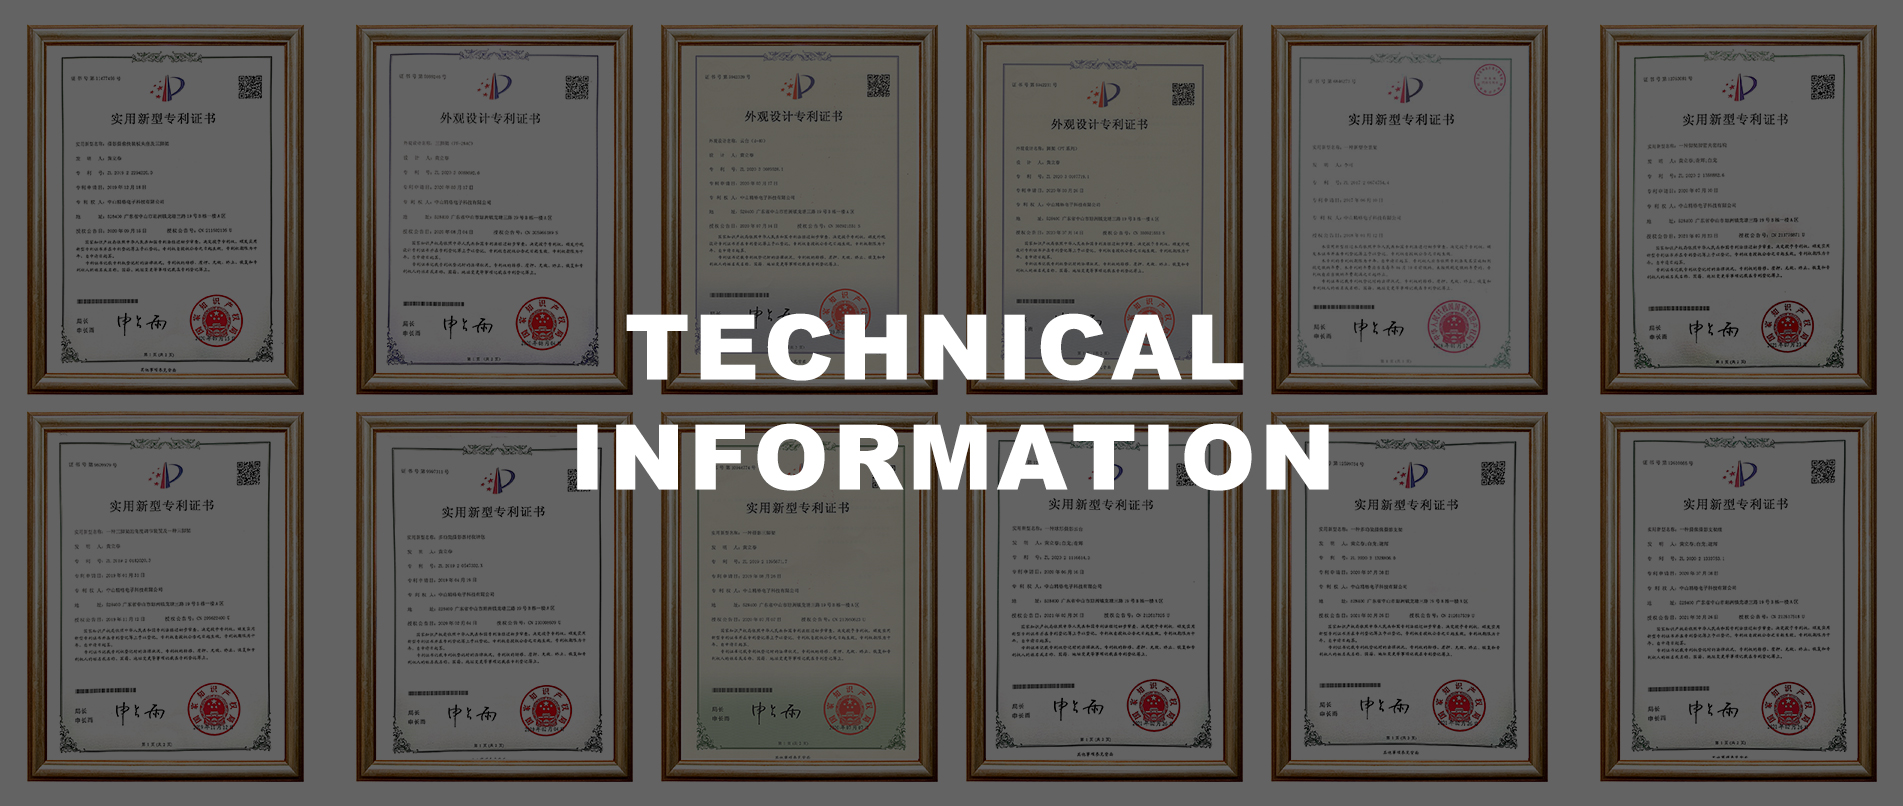 Technical information